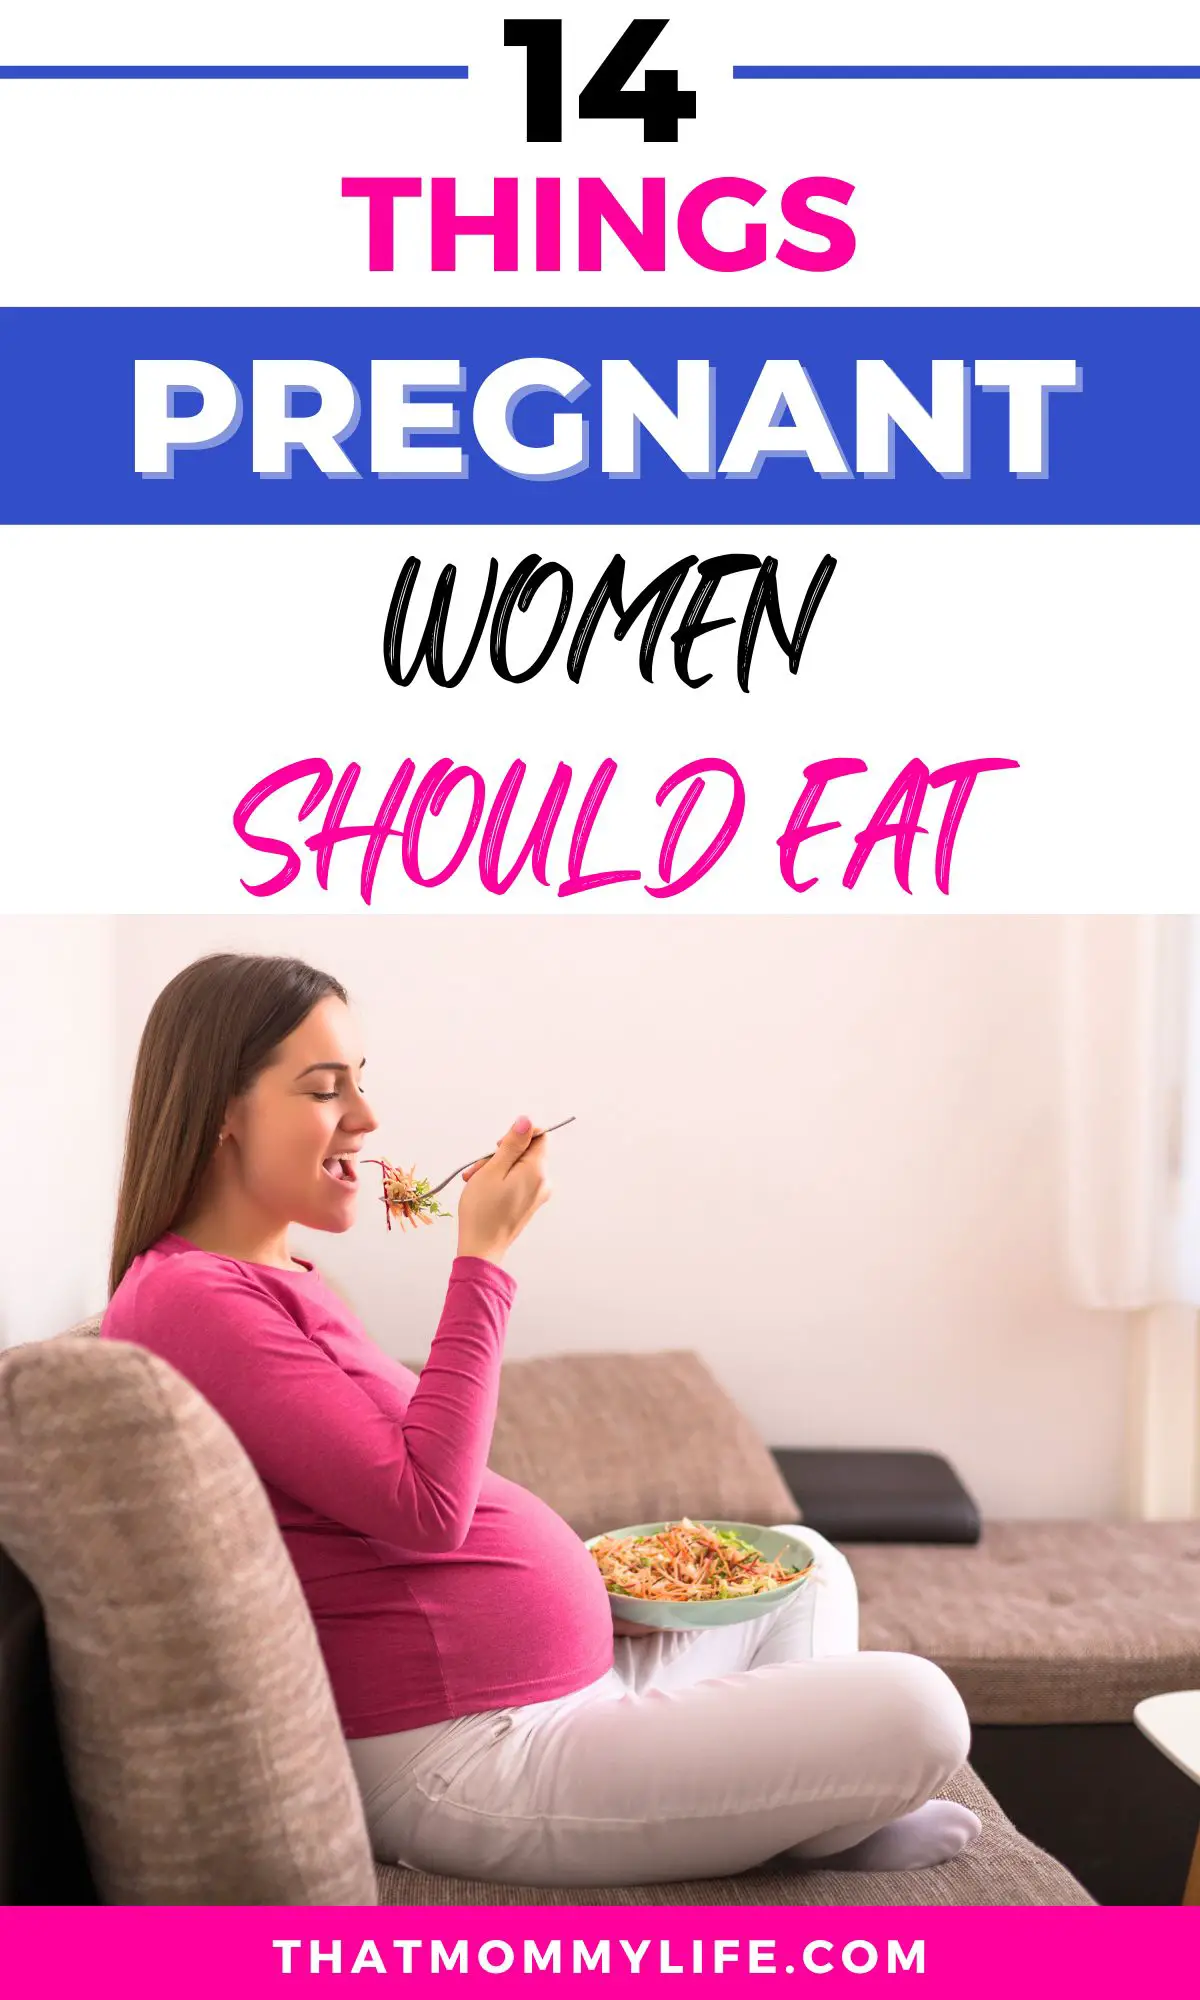 things pregnant women should eat